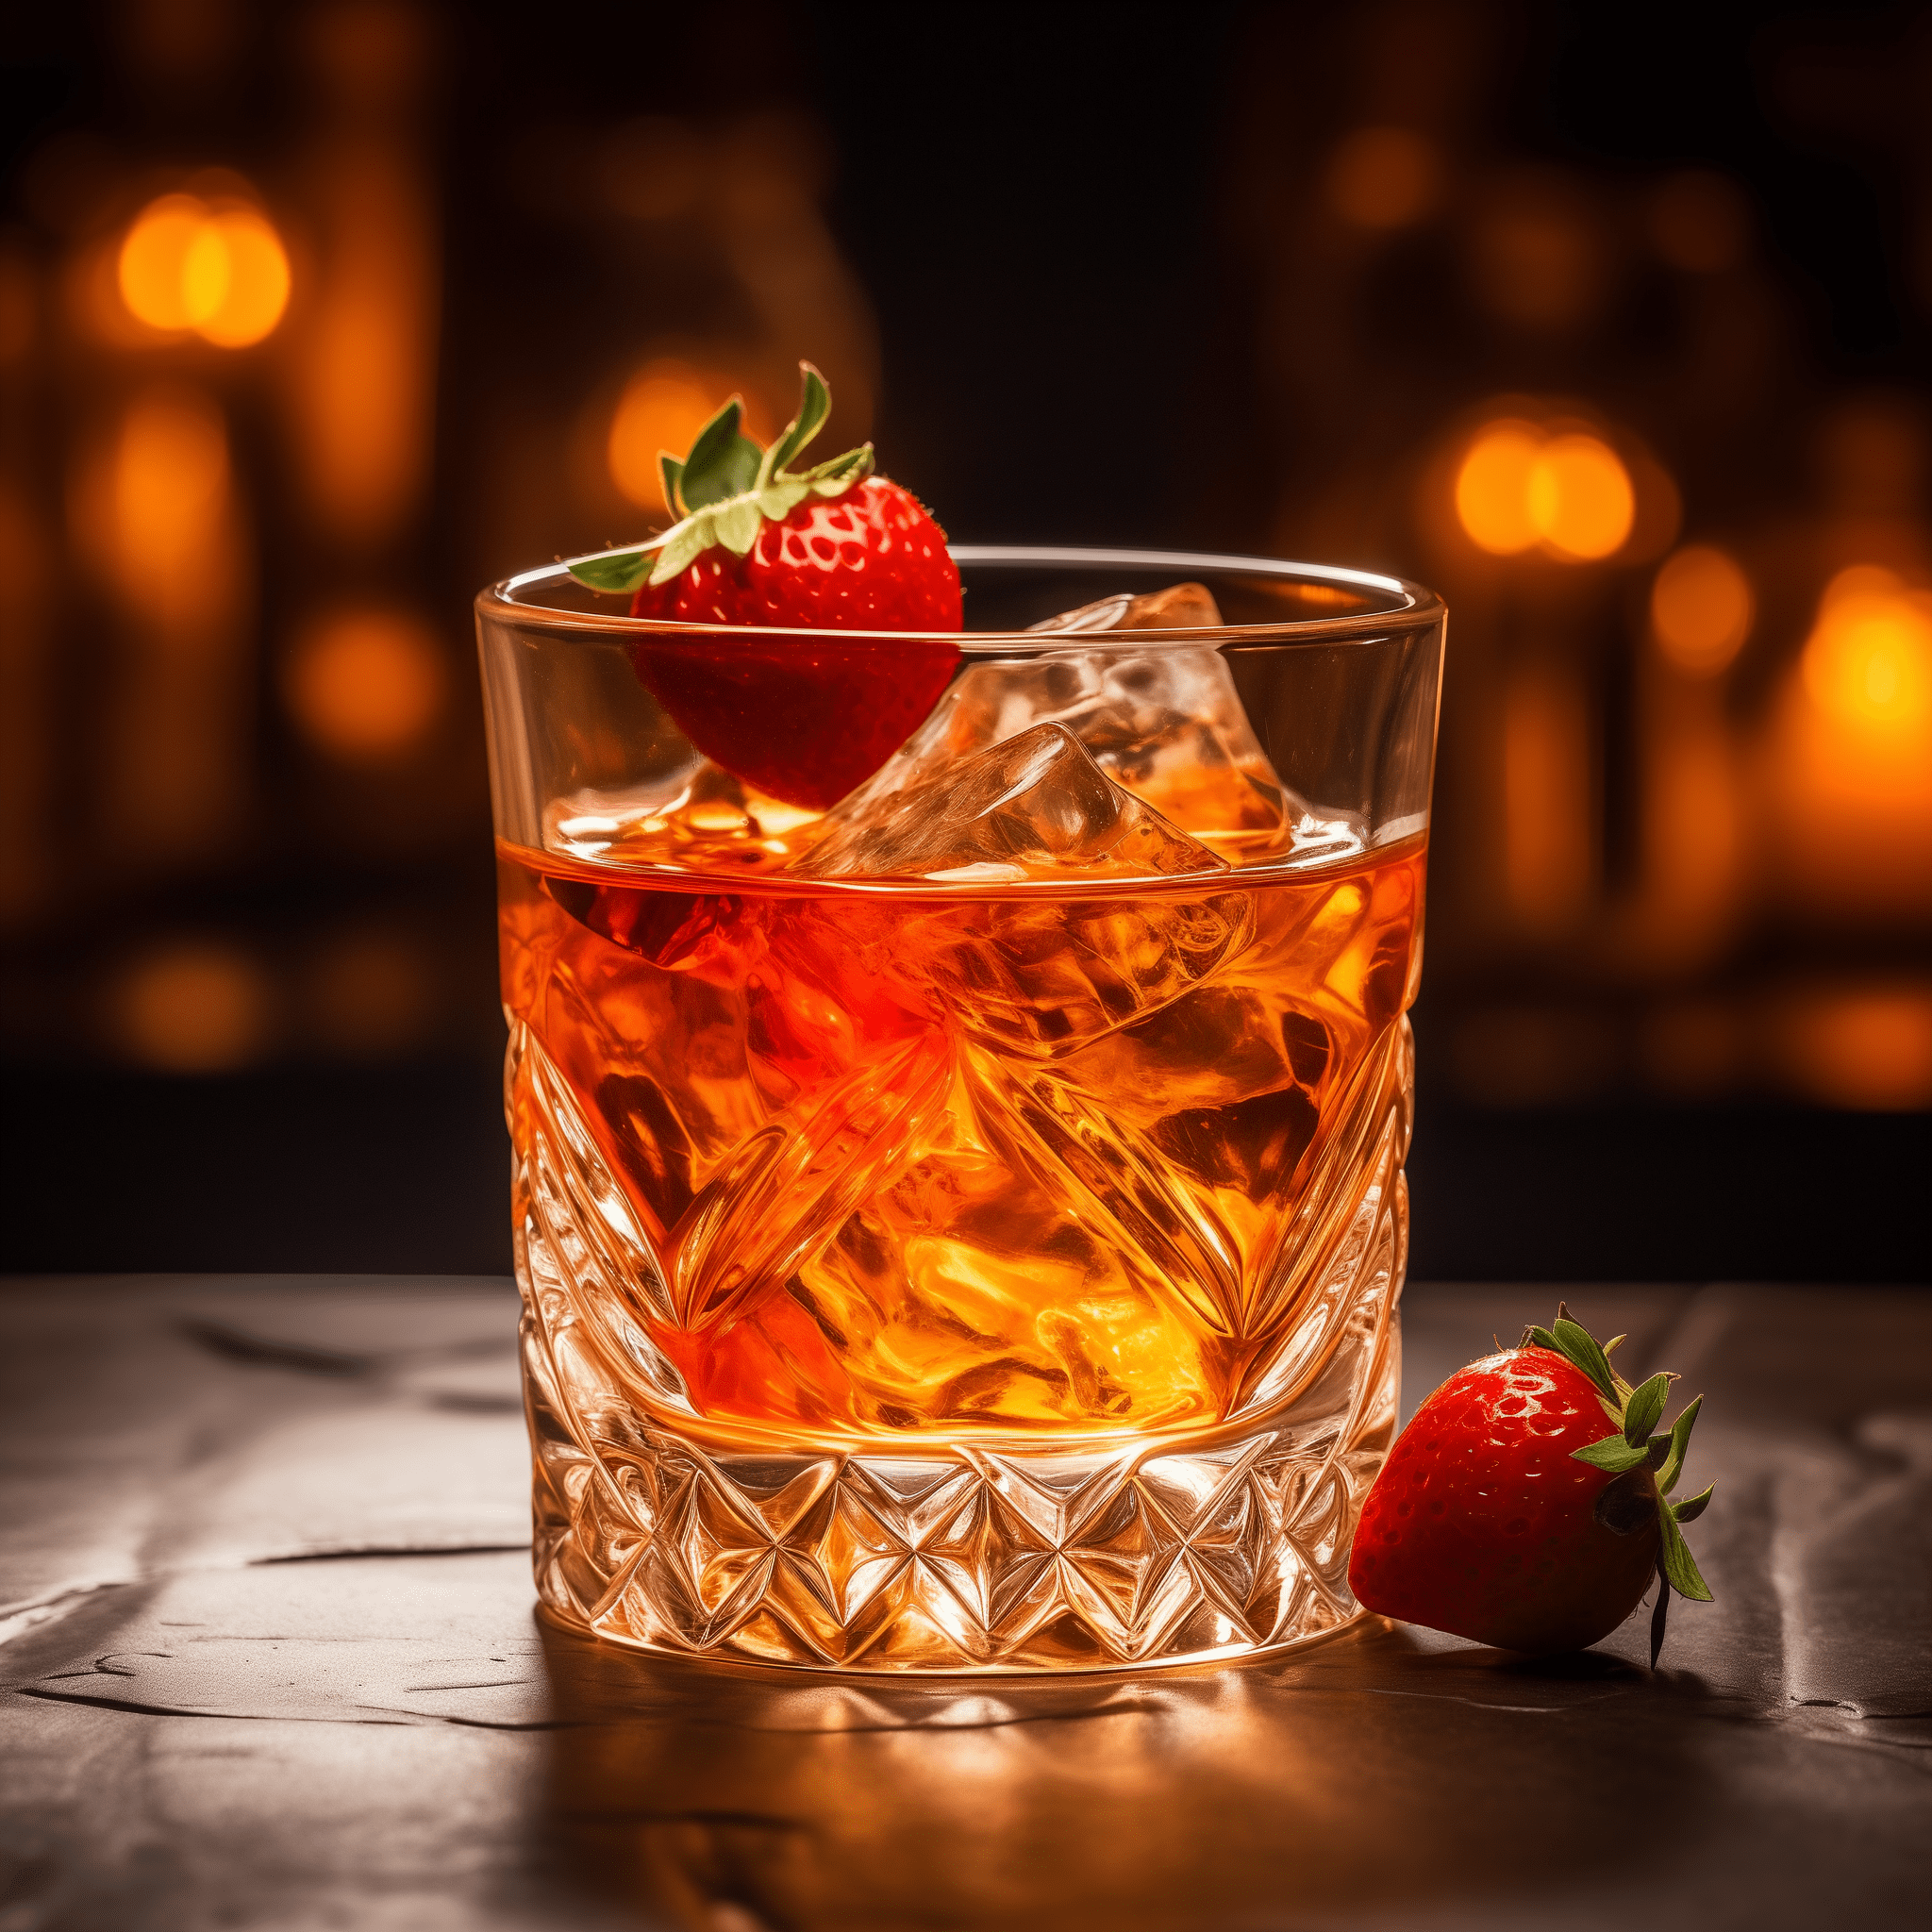 Strawberry Old Fashioned Cocktail Recipe - The Strawberry Old Fashioned is a harmonious blend of sweet, tart, and bitter flavors. The muddled strawberries add a fresh and fruity dimension, while the bourbon provides a smooth, vanilla-caramel undertone with a hint of oak. The bitters balance the sweetness, adding depth and complexity.